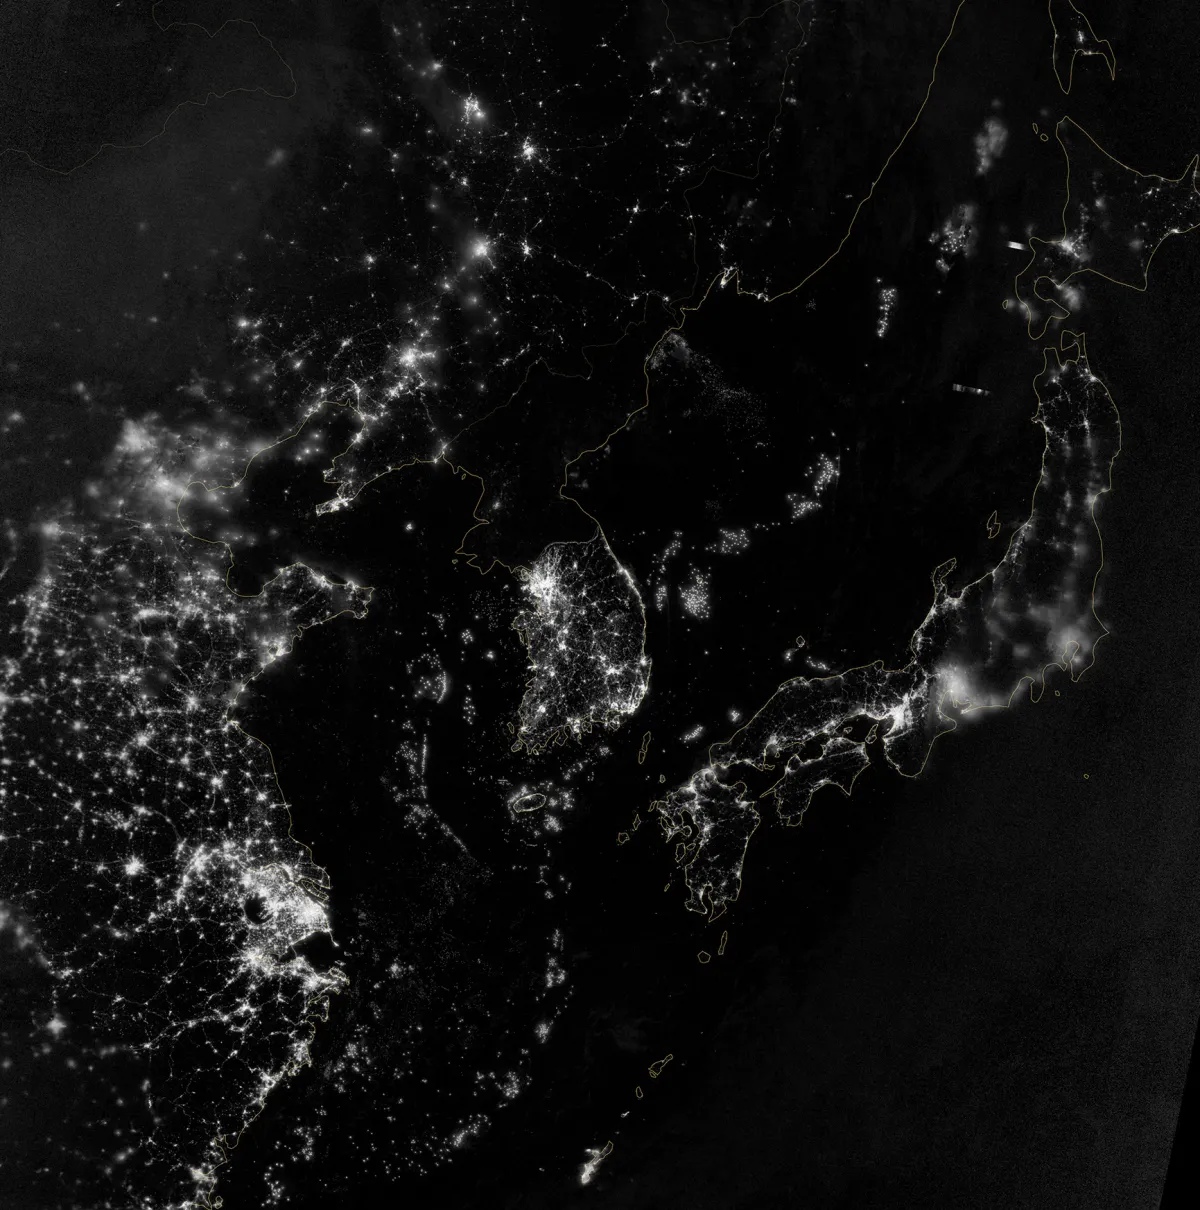 Photo from satellite at night showing East Asia. China, Japan, and South Korean cities appear as bright lights, but North Korea is mostly in darkness.